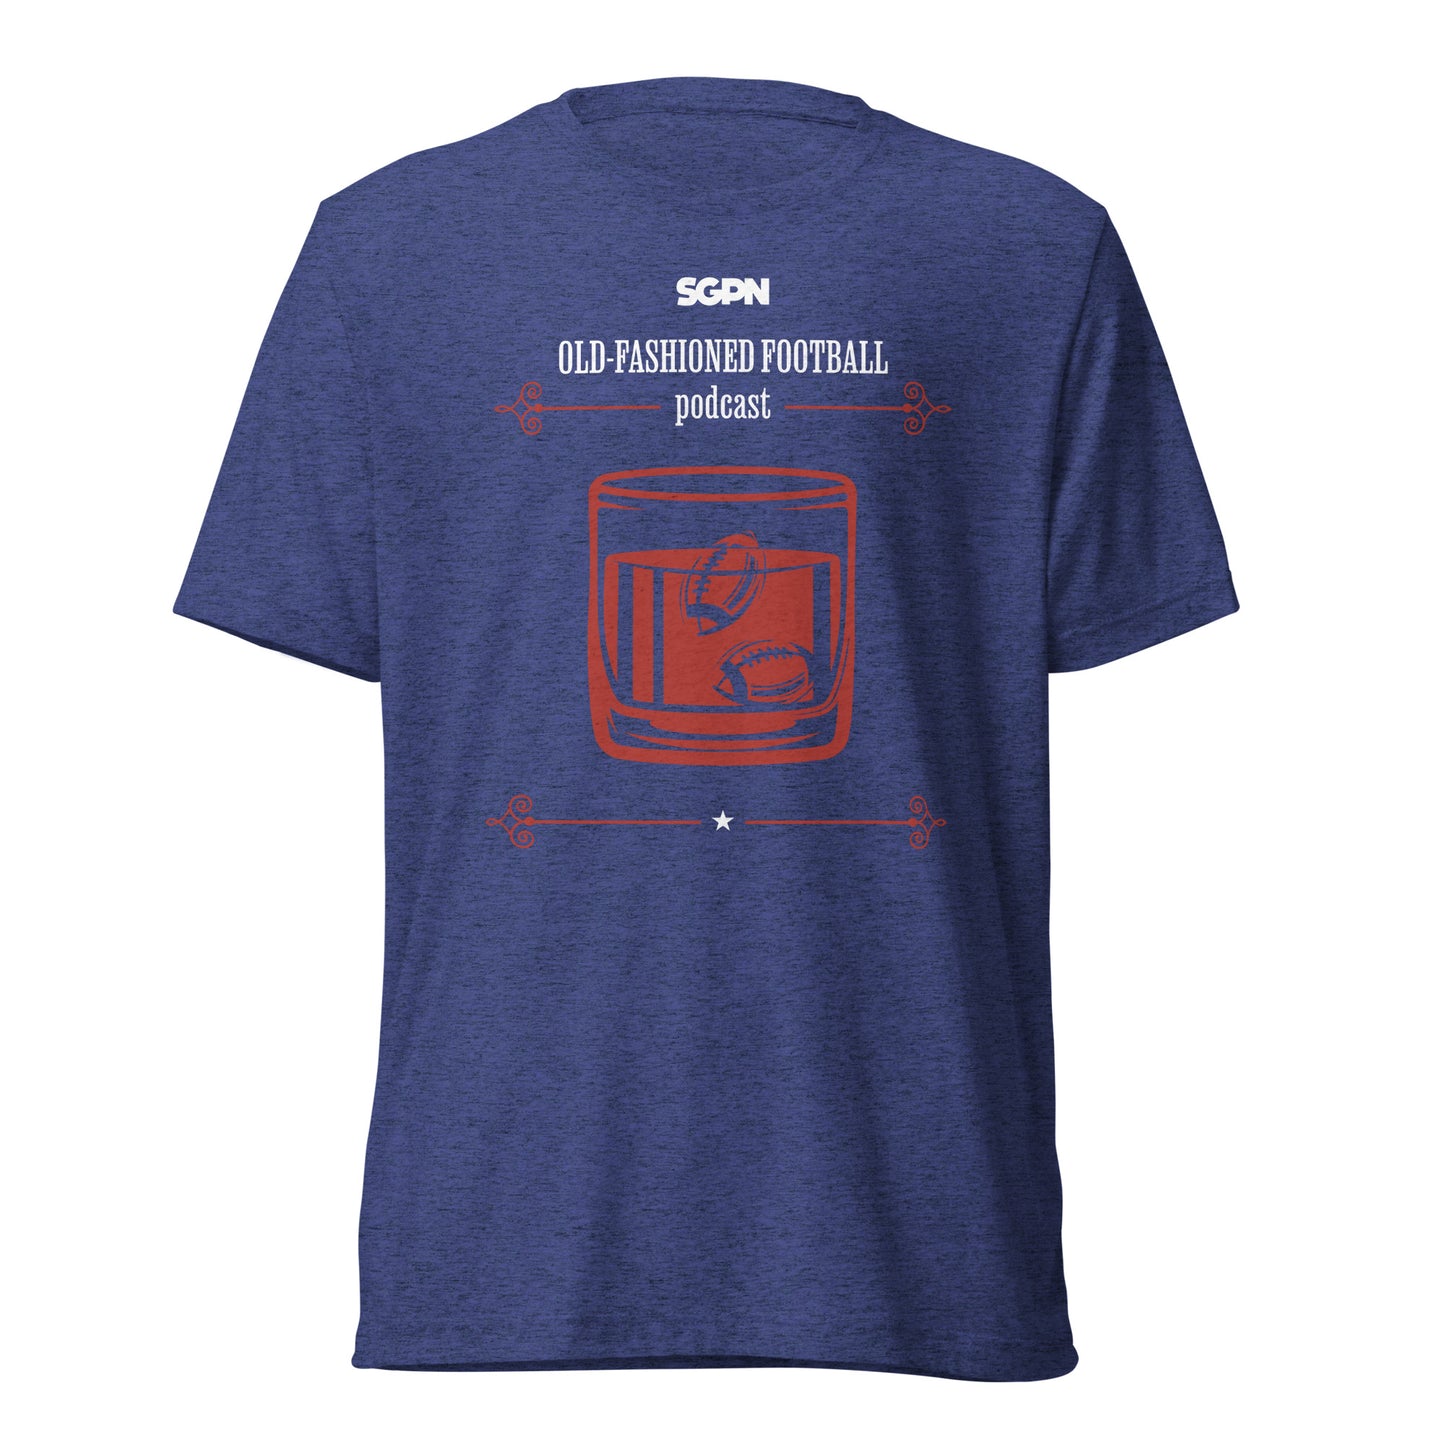 Old-Fashioned Football Podcast - SGPN Fantasy Football (White/Red) - Short sleeve t-shirt